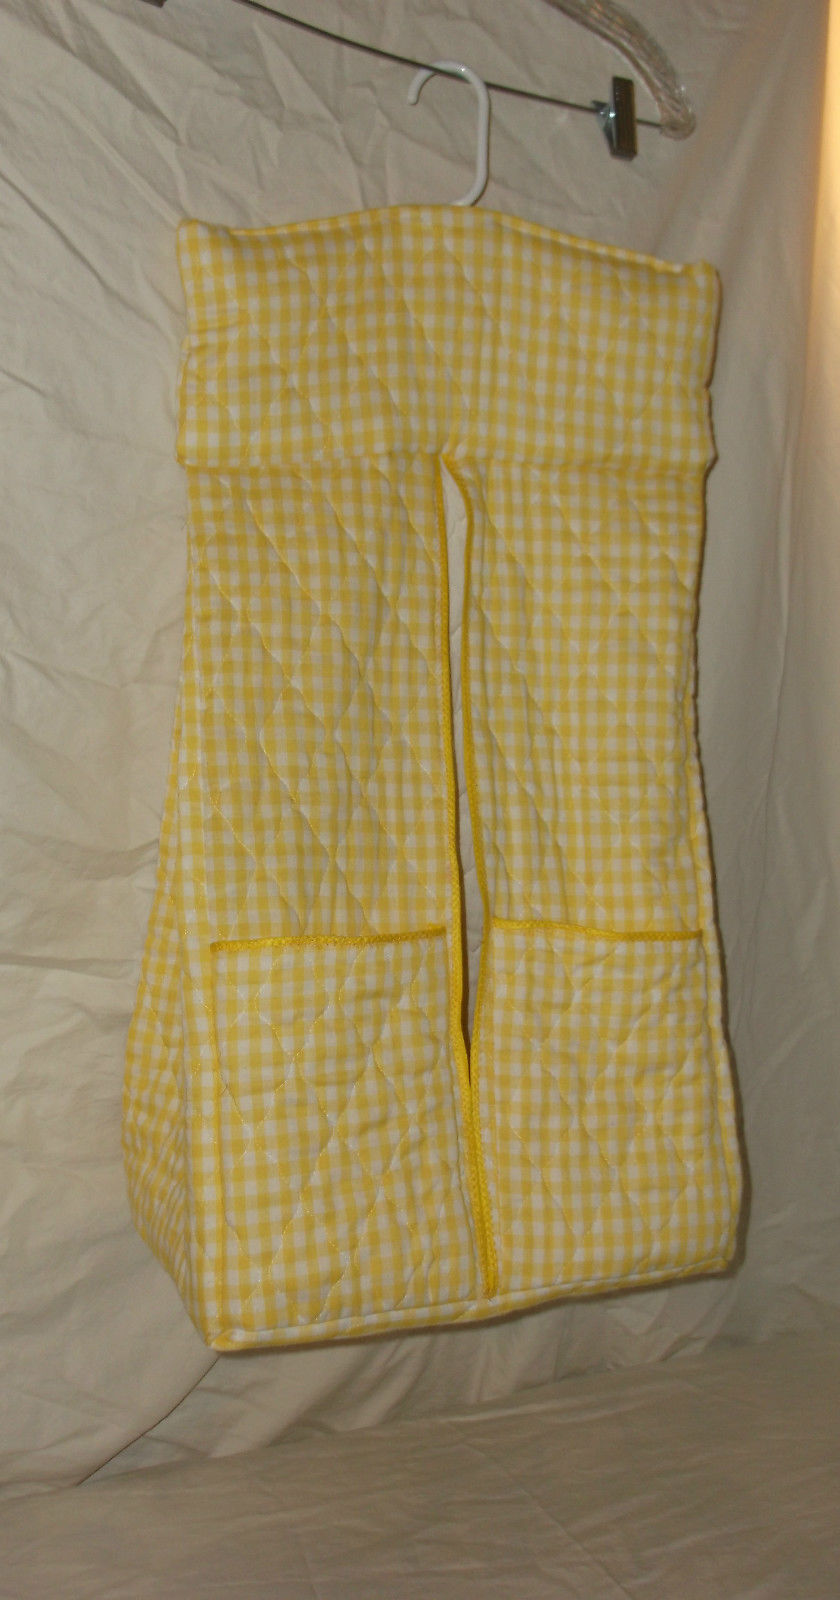 Diaper-Stacker-Custom-Made-Quilted-Yellow-and-White.jpg